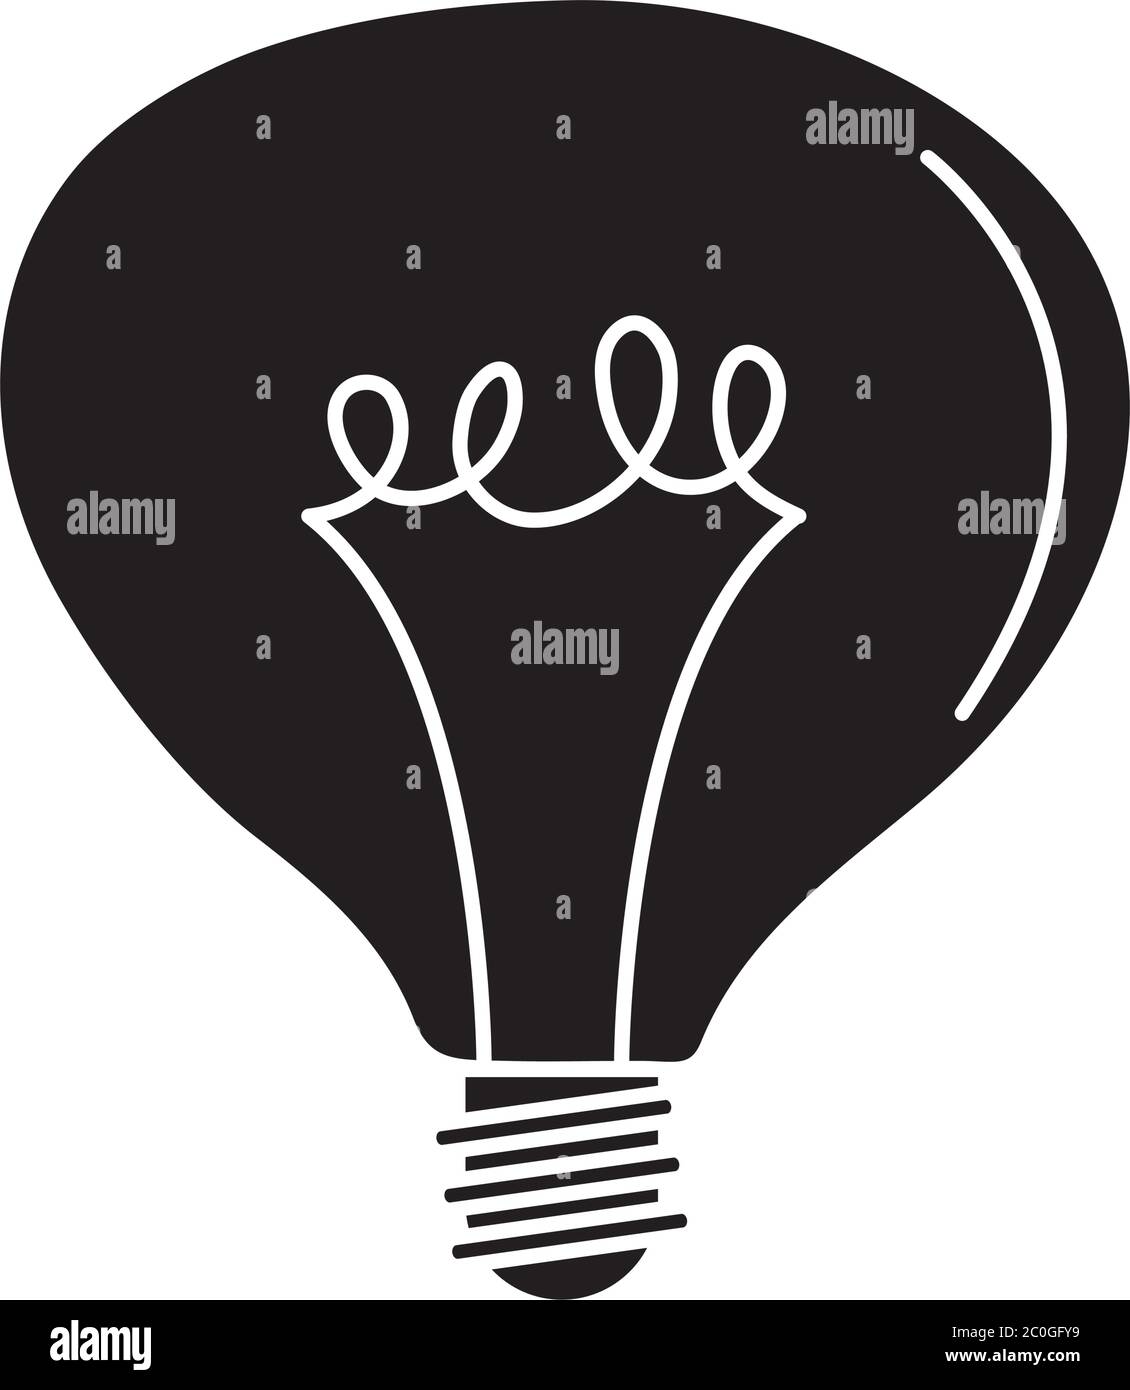 electric light bulb, round lamp, eco idea metaphor, isolated icon silhouette style vector illustration Stock Vector